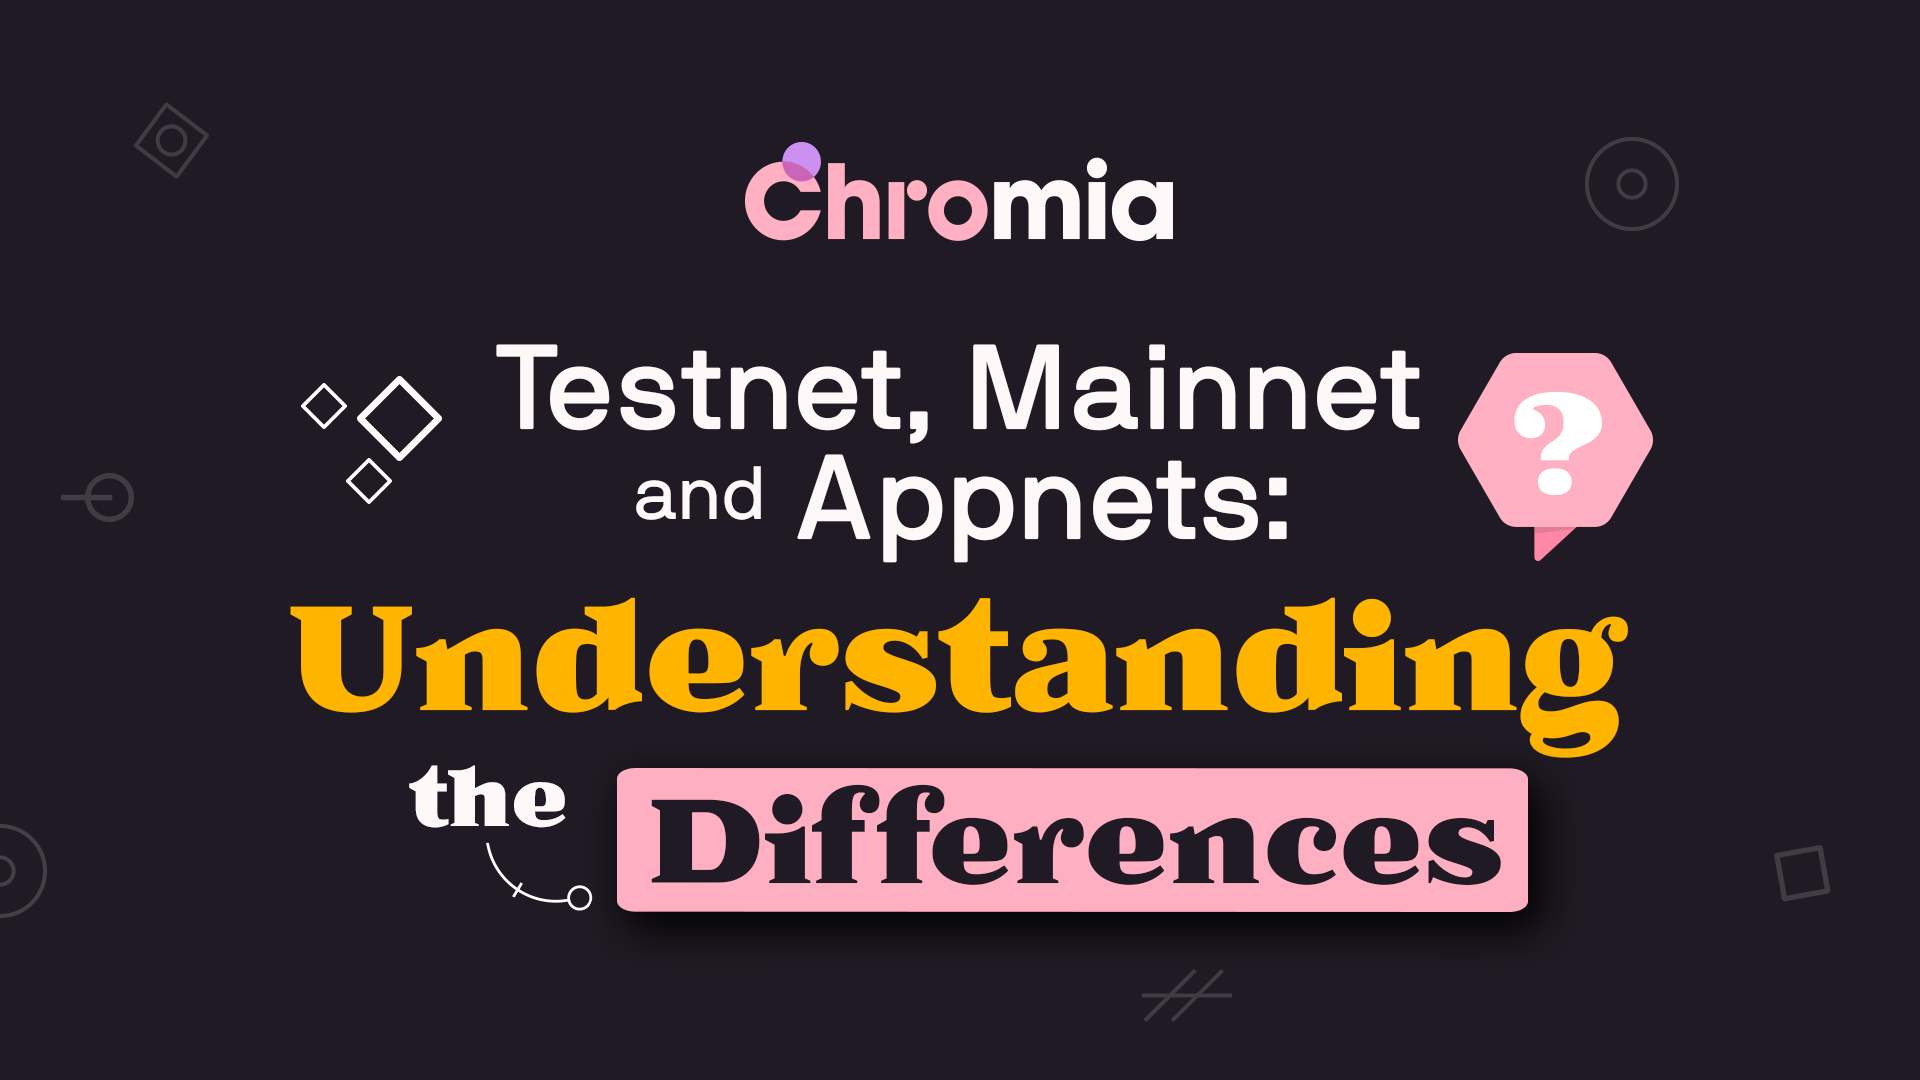 Testnet, Mainnet, and Appnets: Understanding the Differences